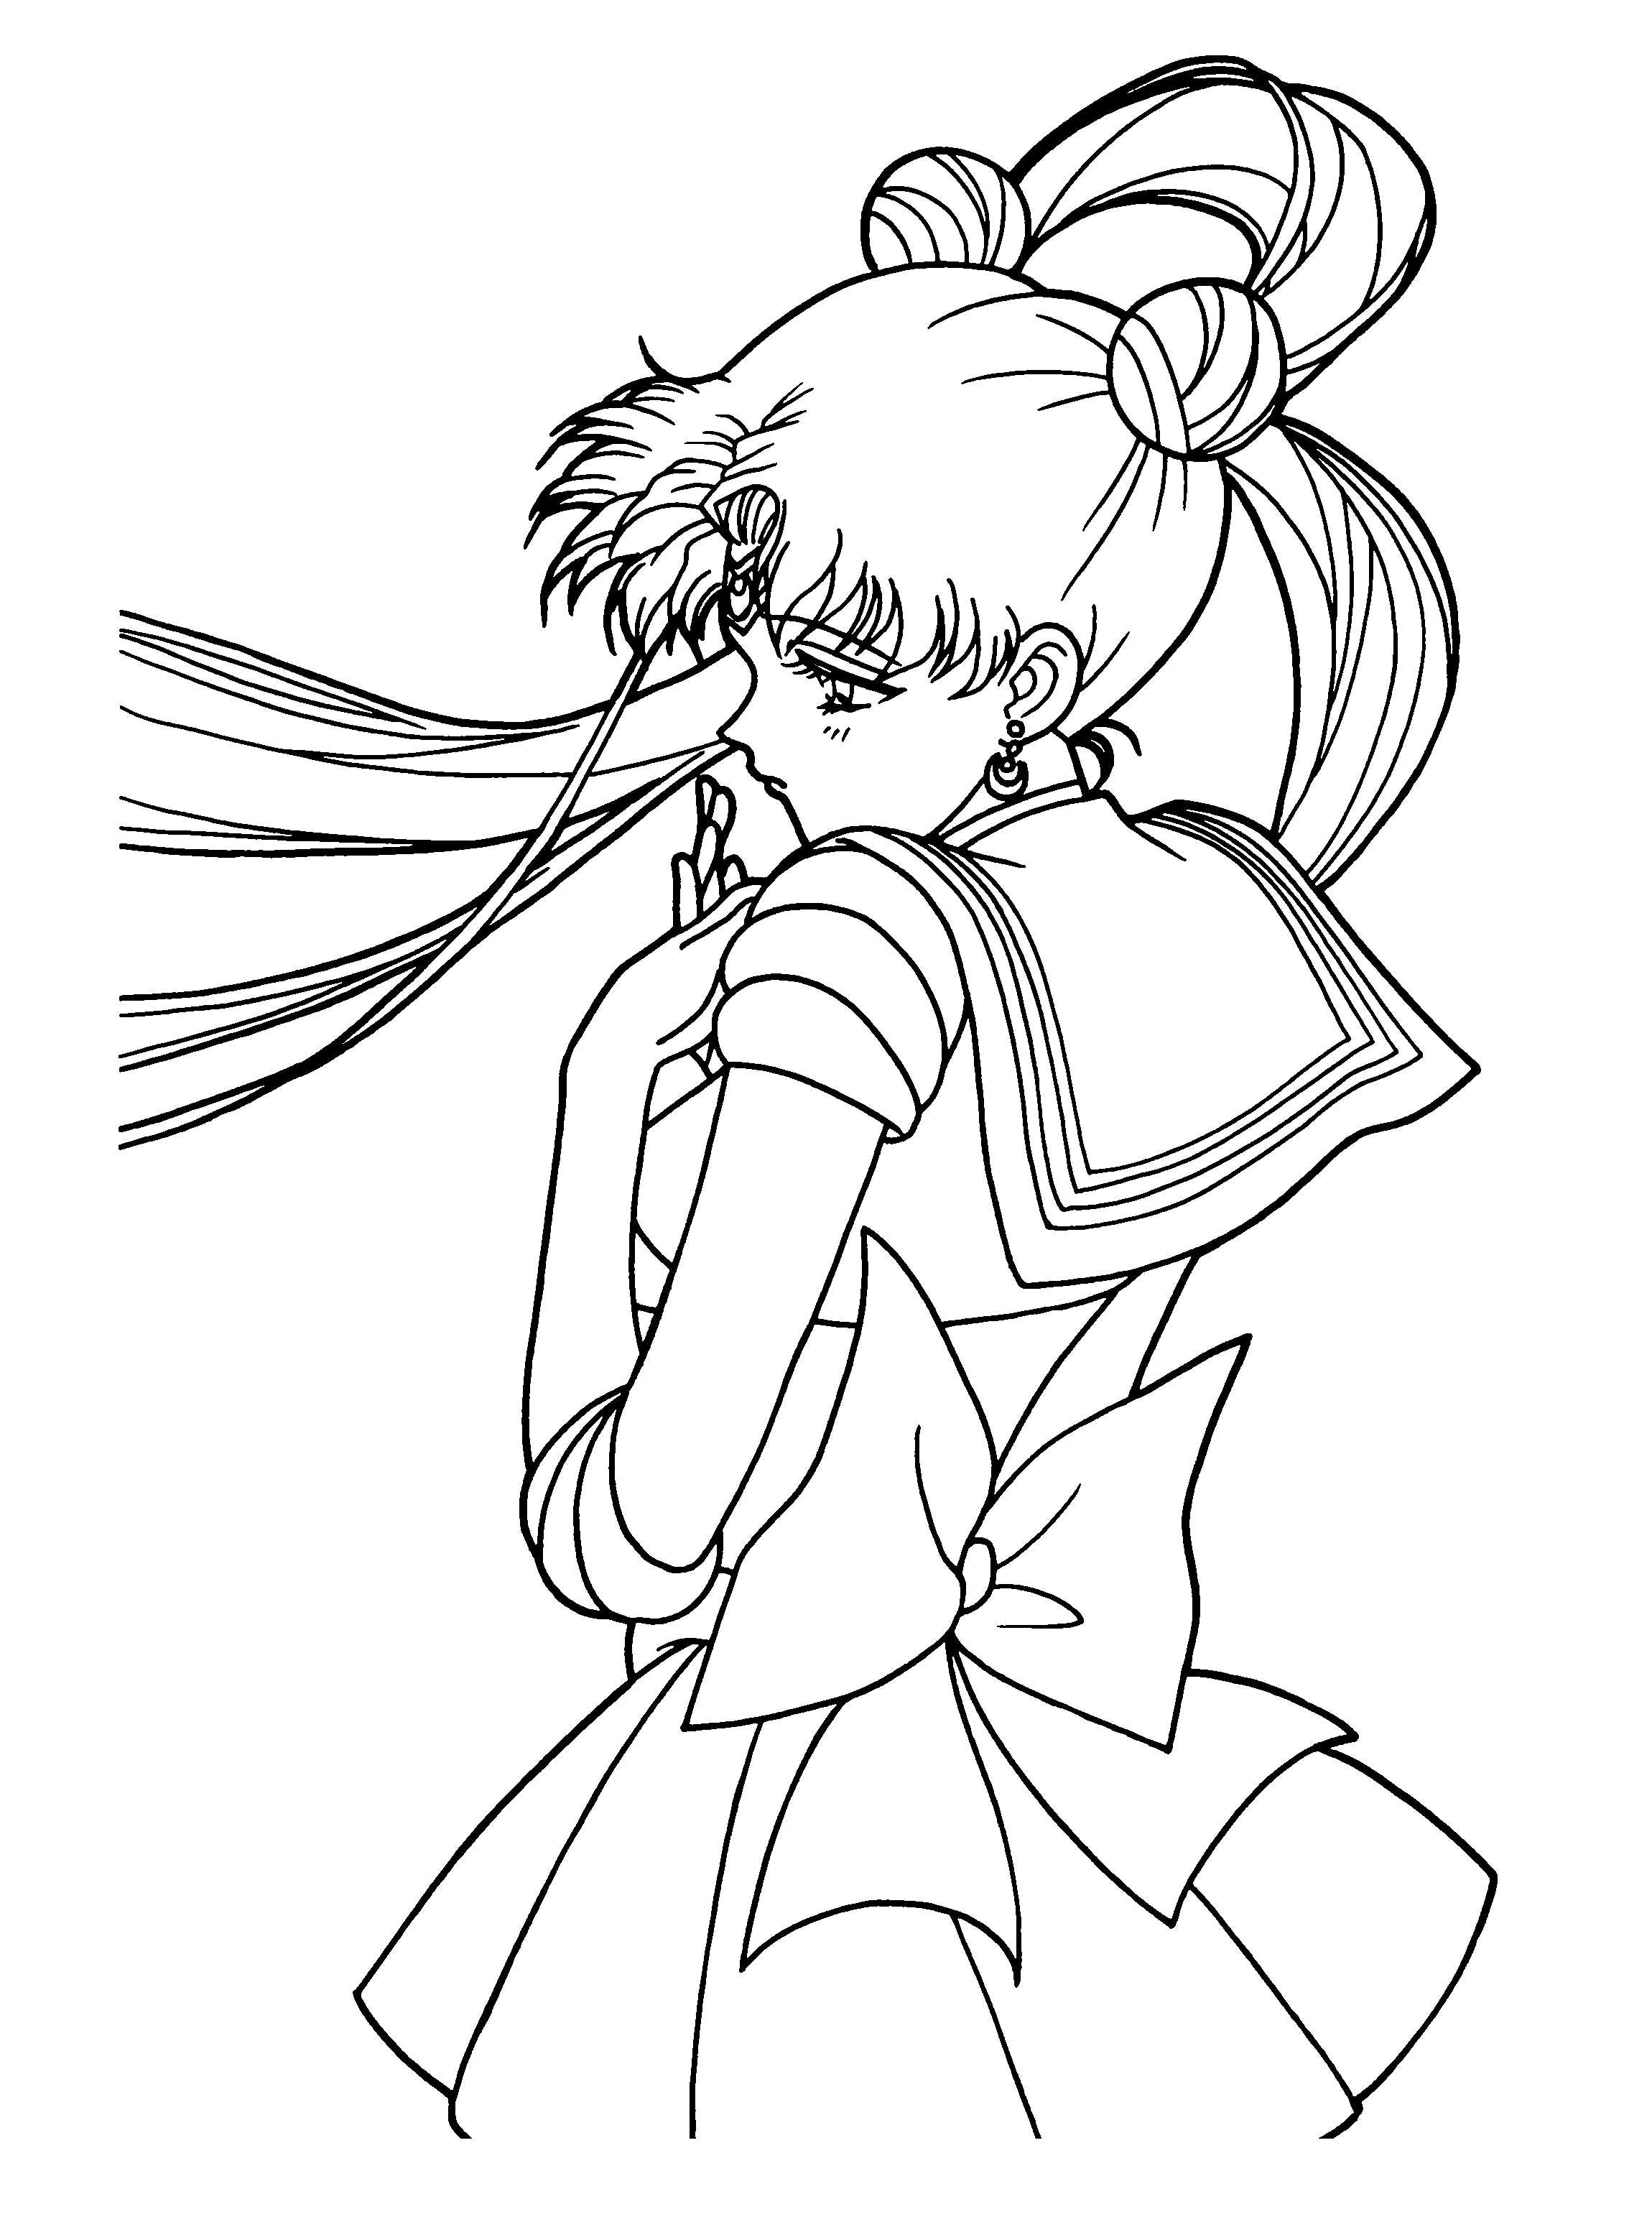 coloring sailor moon sailor moon coloring pages 5 colouring pictures lineart moon sailor coloring 